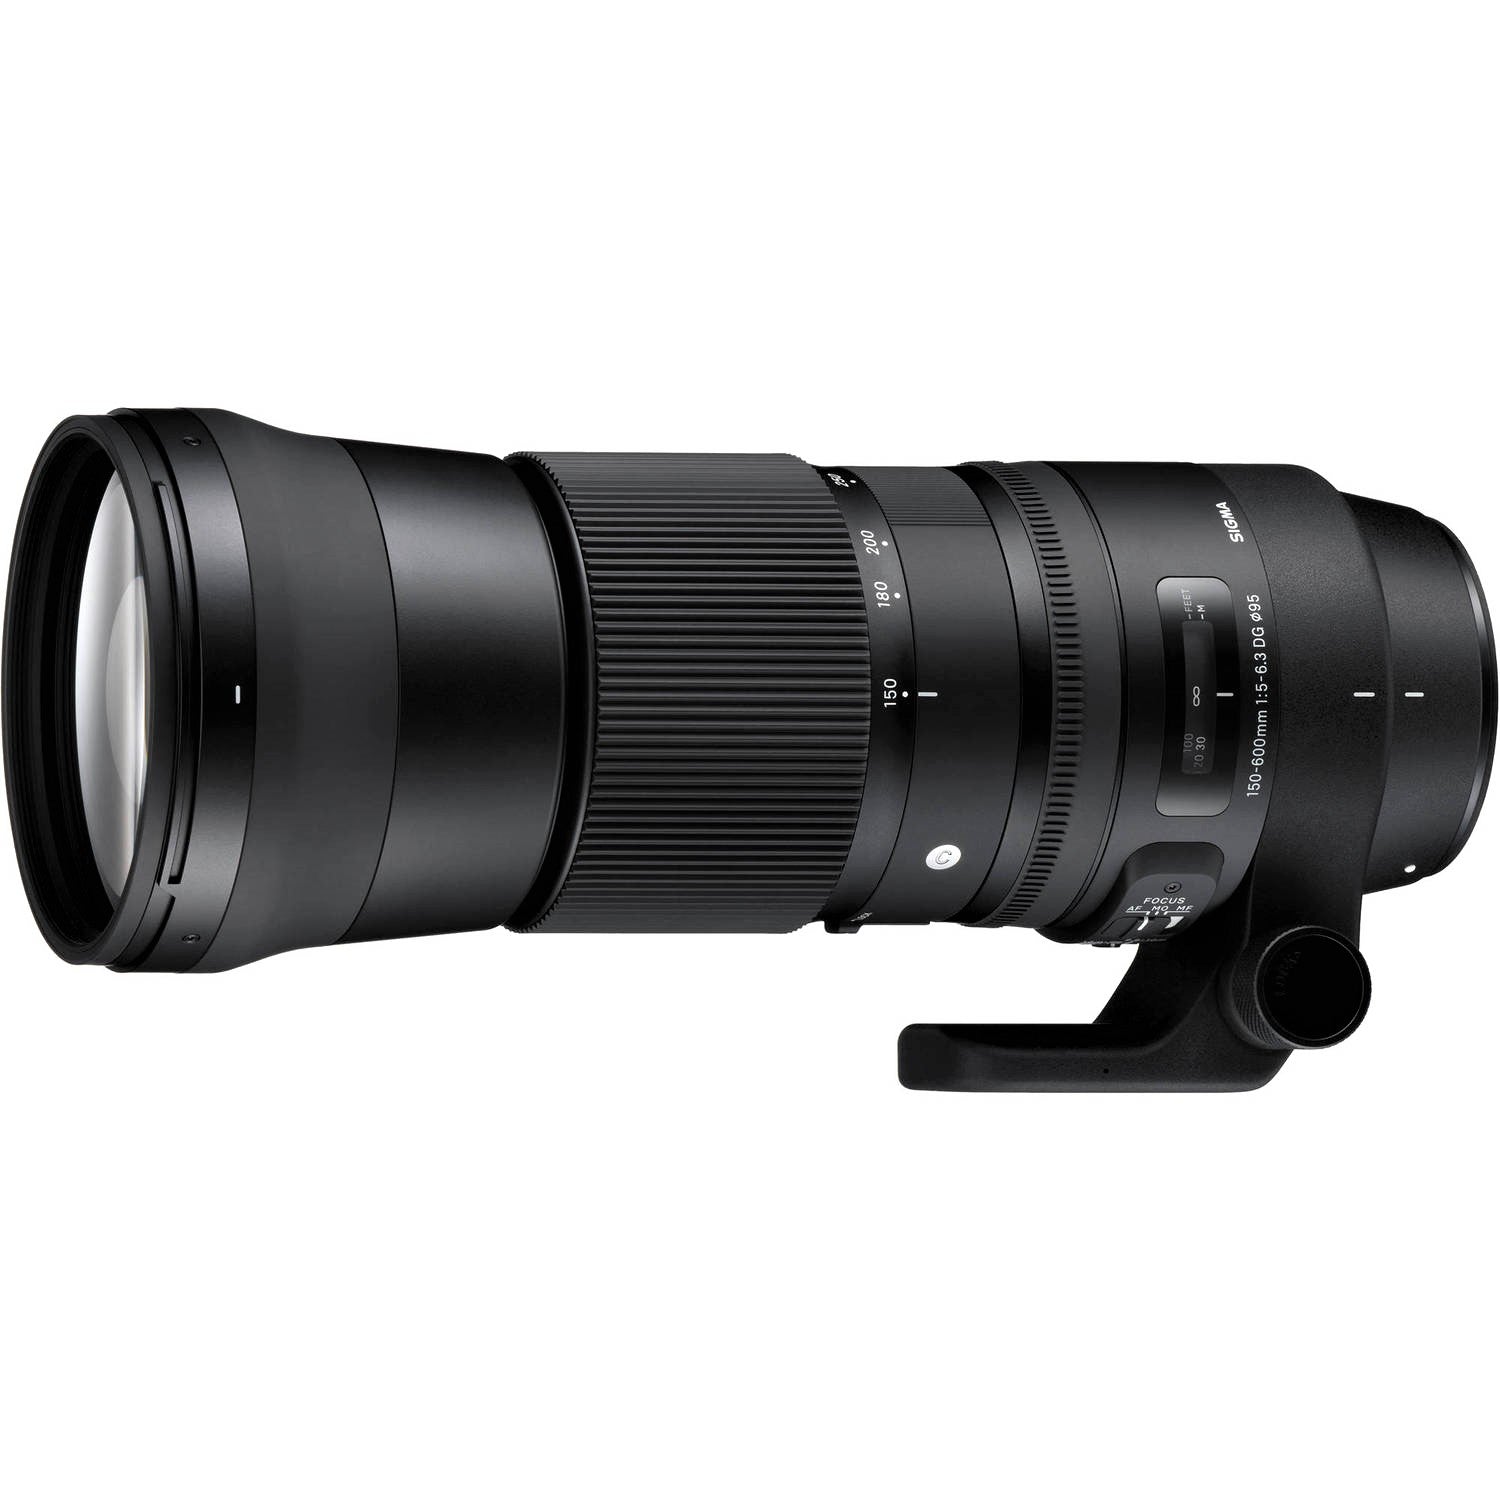 Sigma 150-600mm F5-6.3 DG OS HSM Contemporary Lens for Nikon F with Attached Lens Hood on the Left